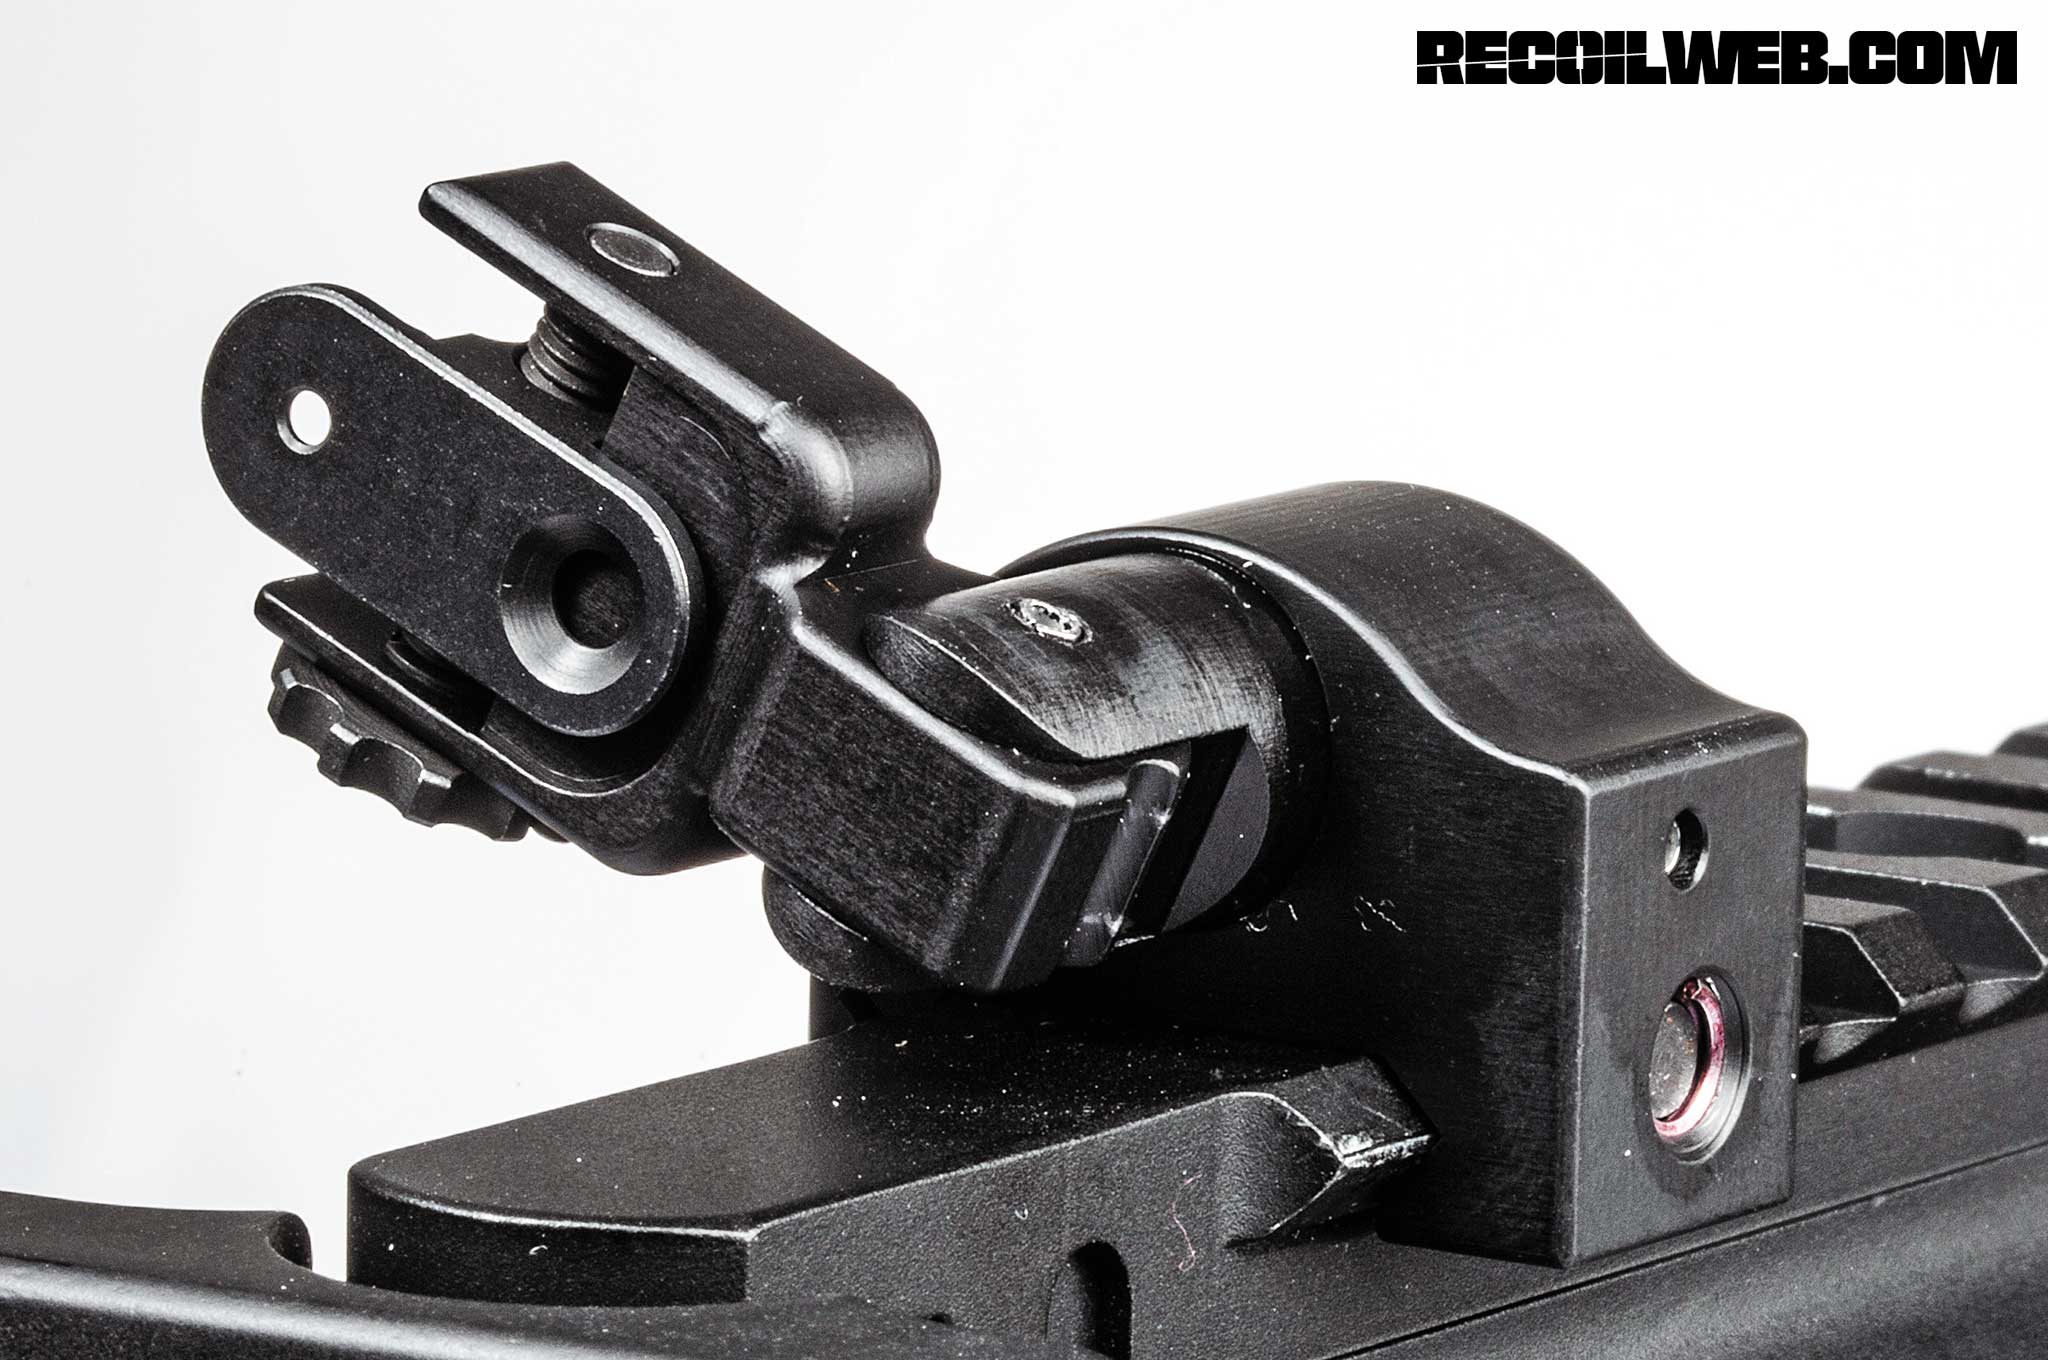 back-up-iron-sights-buyers-guide-wm-tactical-tuor-mkii-locking-iron-sights-...